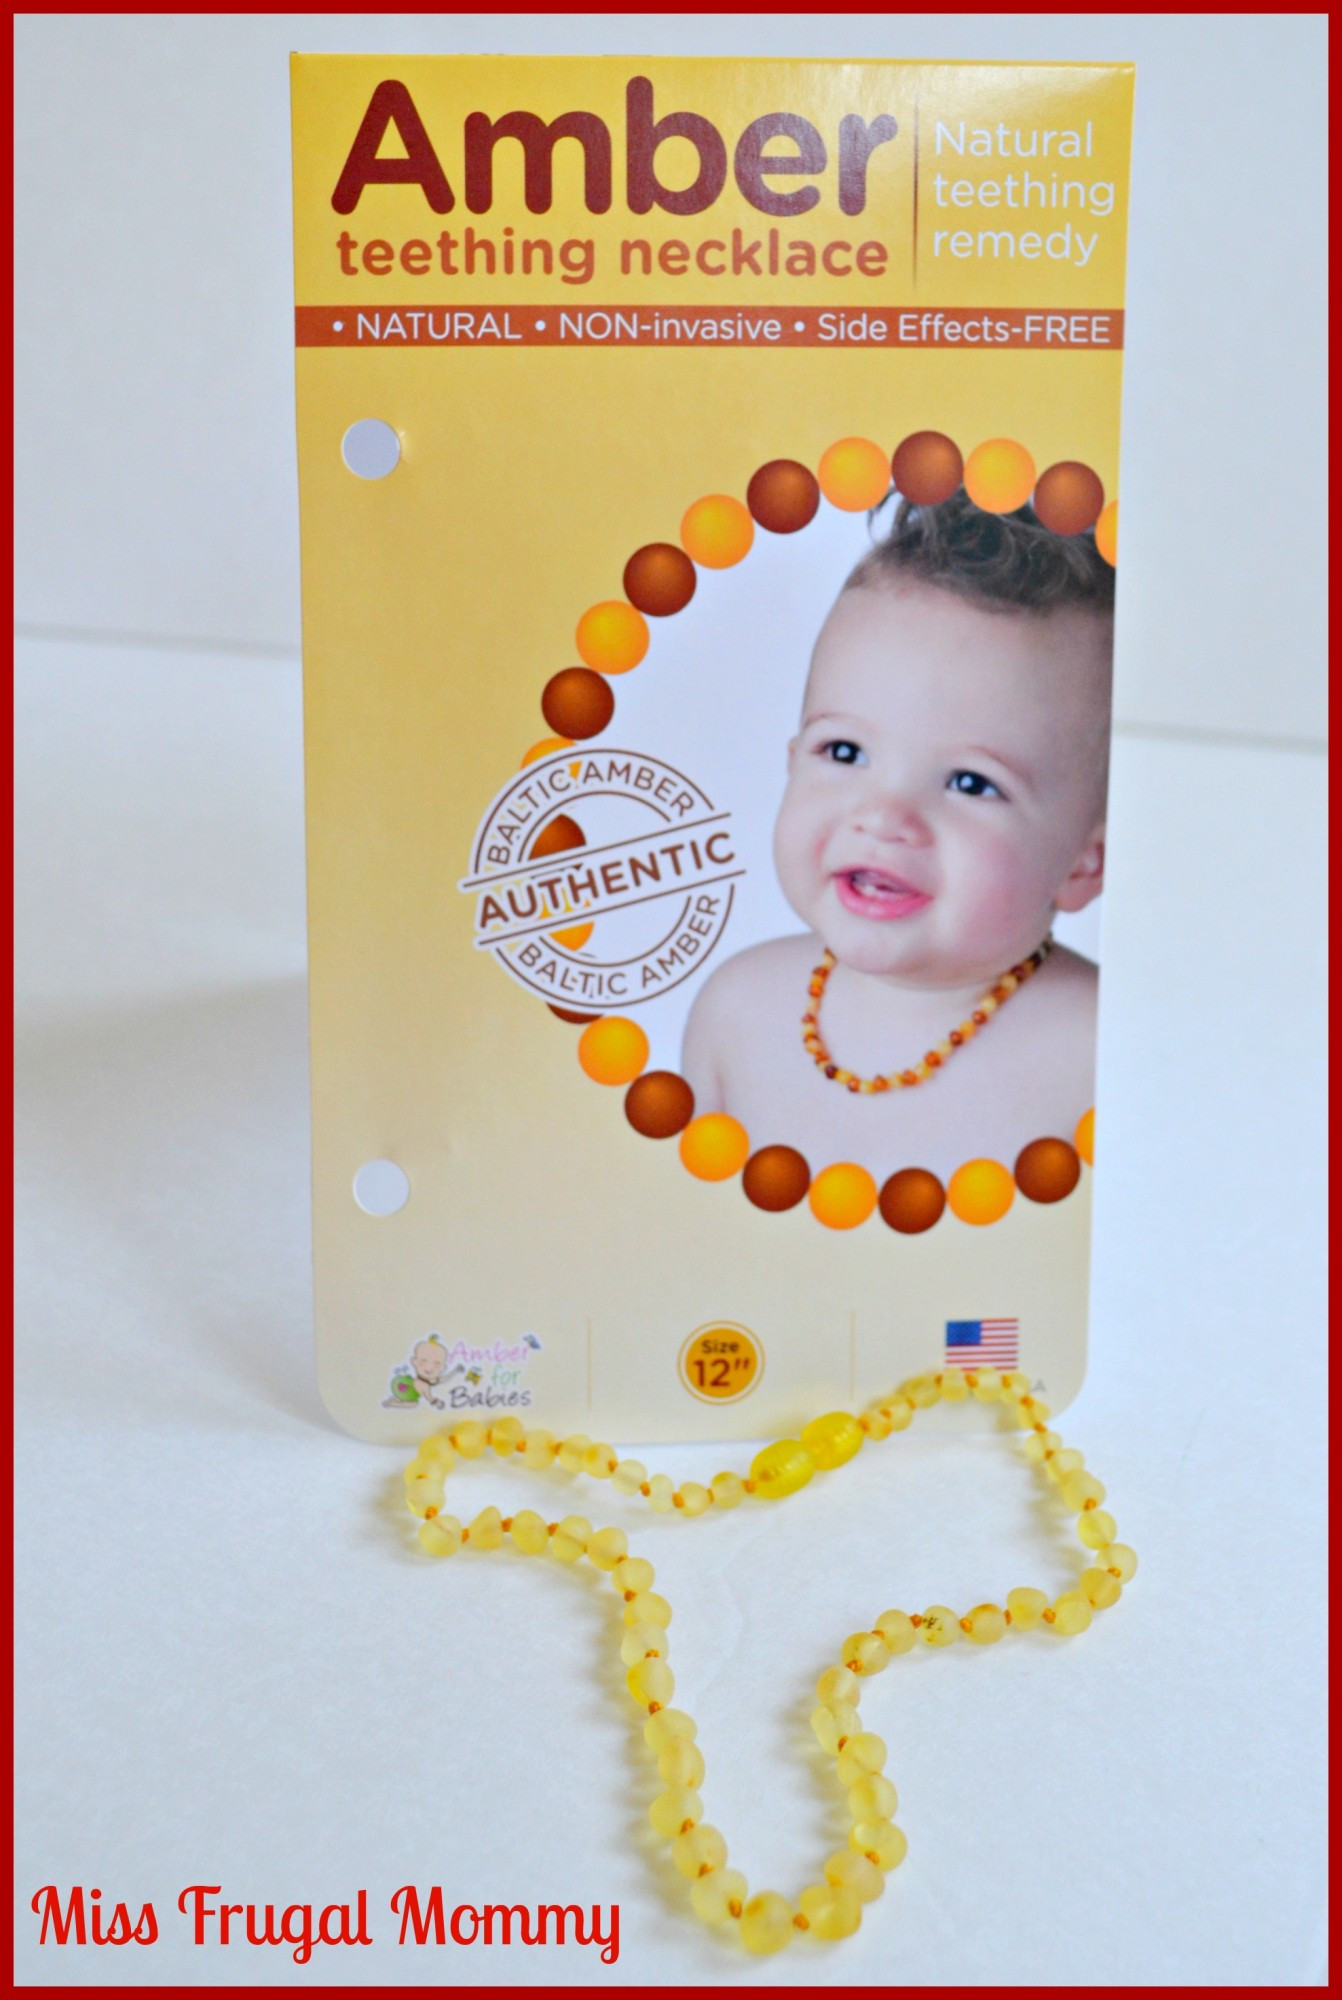 Amber Teething Necklace Review
 Lemon Raw Beads Amber Teething Necklace Review Getting